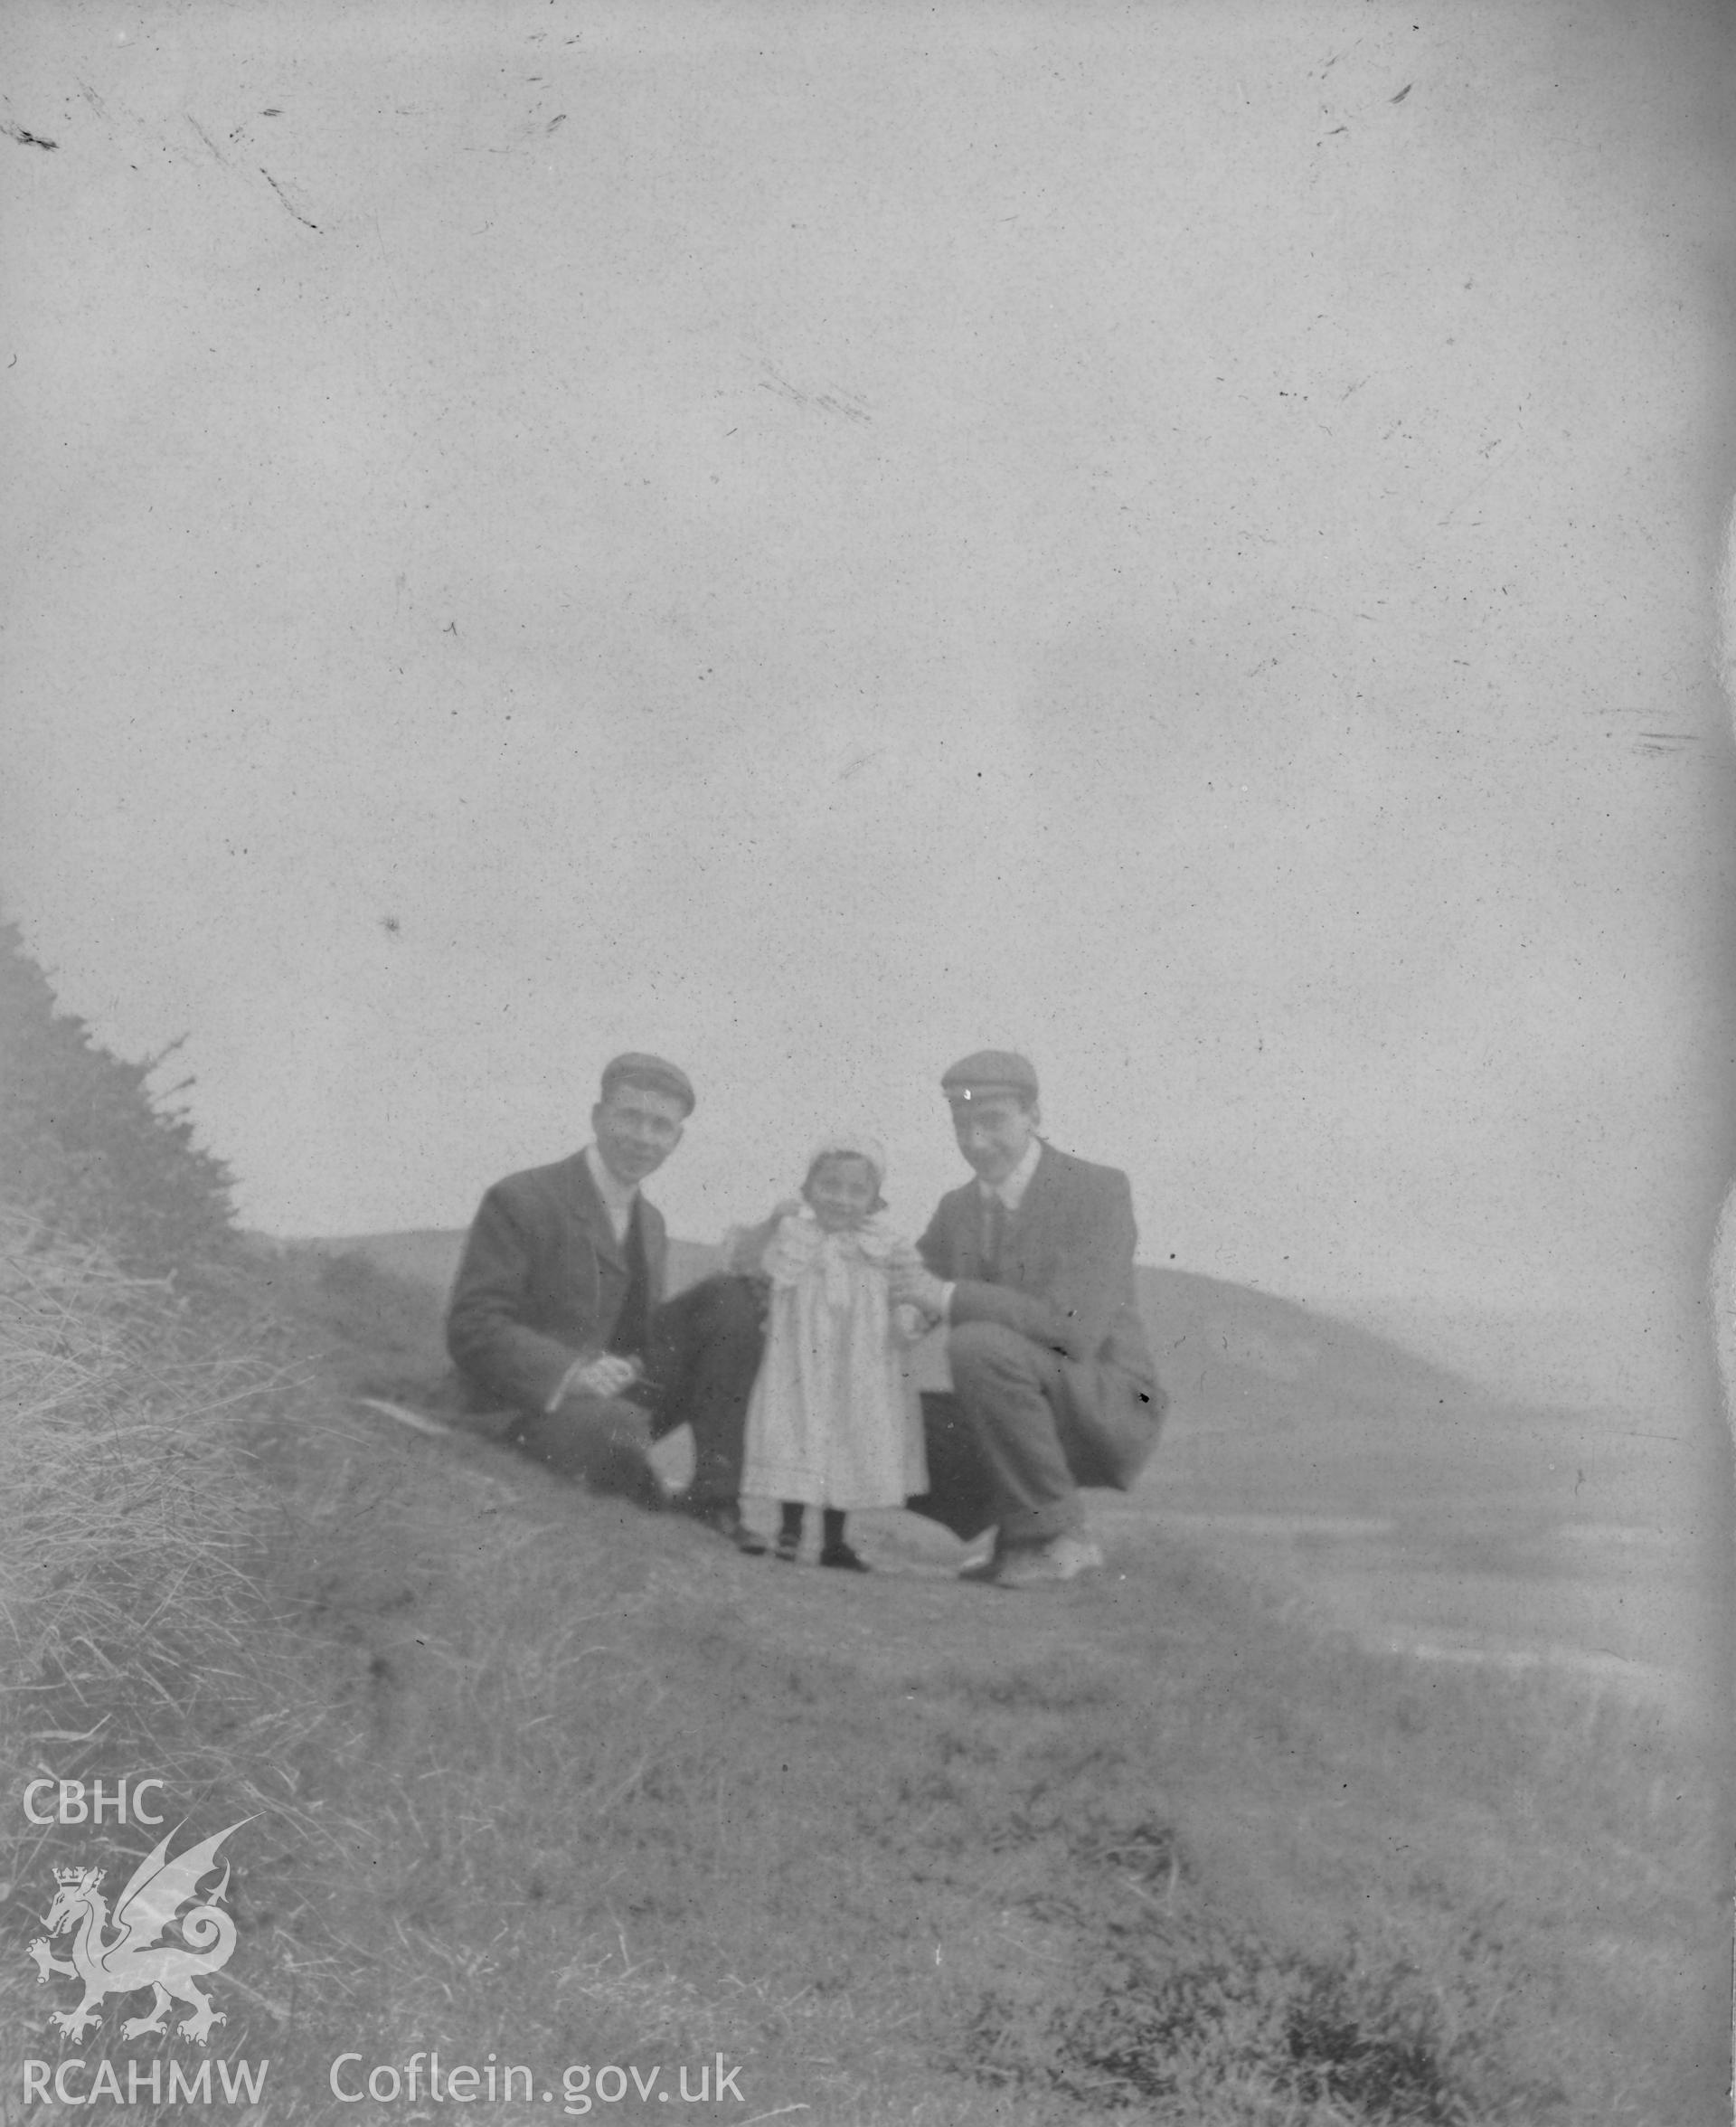 "On Pen Dinas path 1903". Photo of two adults and a small child. Digitised from a photograph album showing views of Aberystwyth and District, produced by David John Saer, school teacher of Aberystwyth. Loaned for copying by Dr Alan Chamberlain.